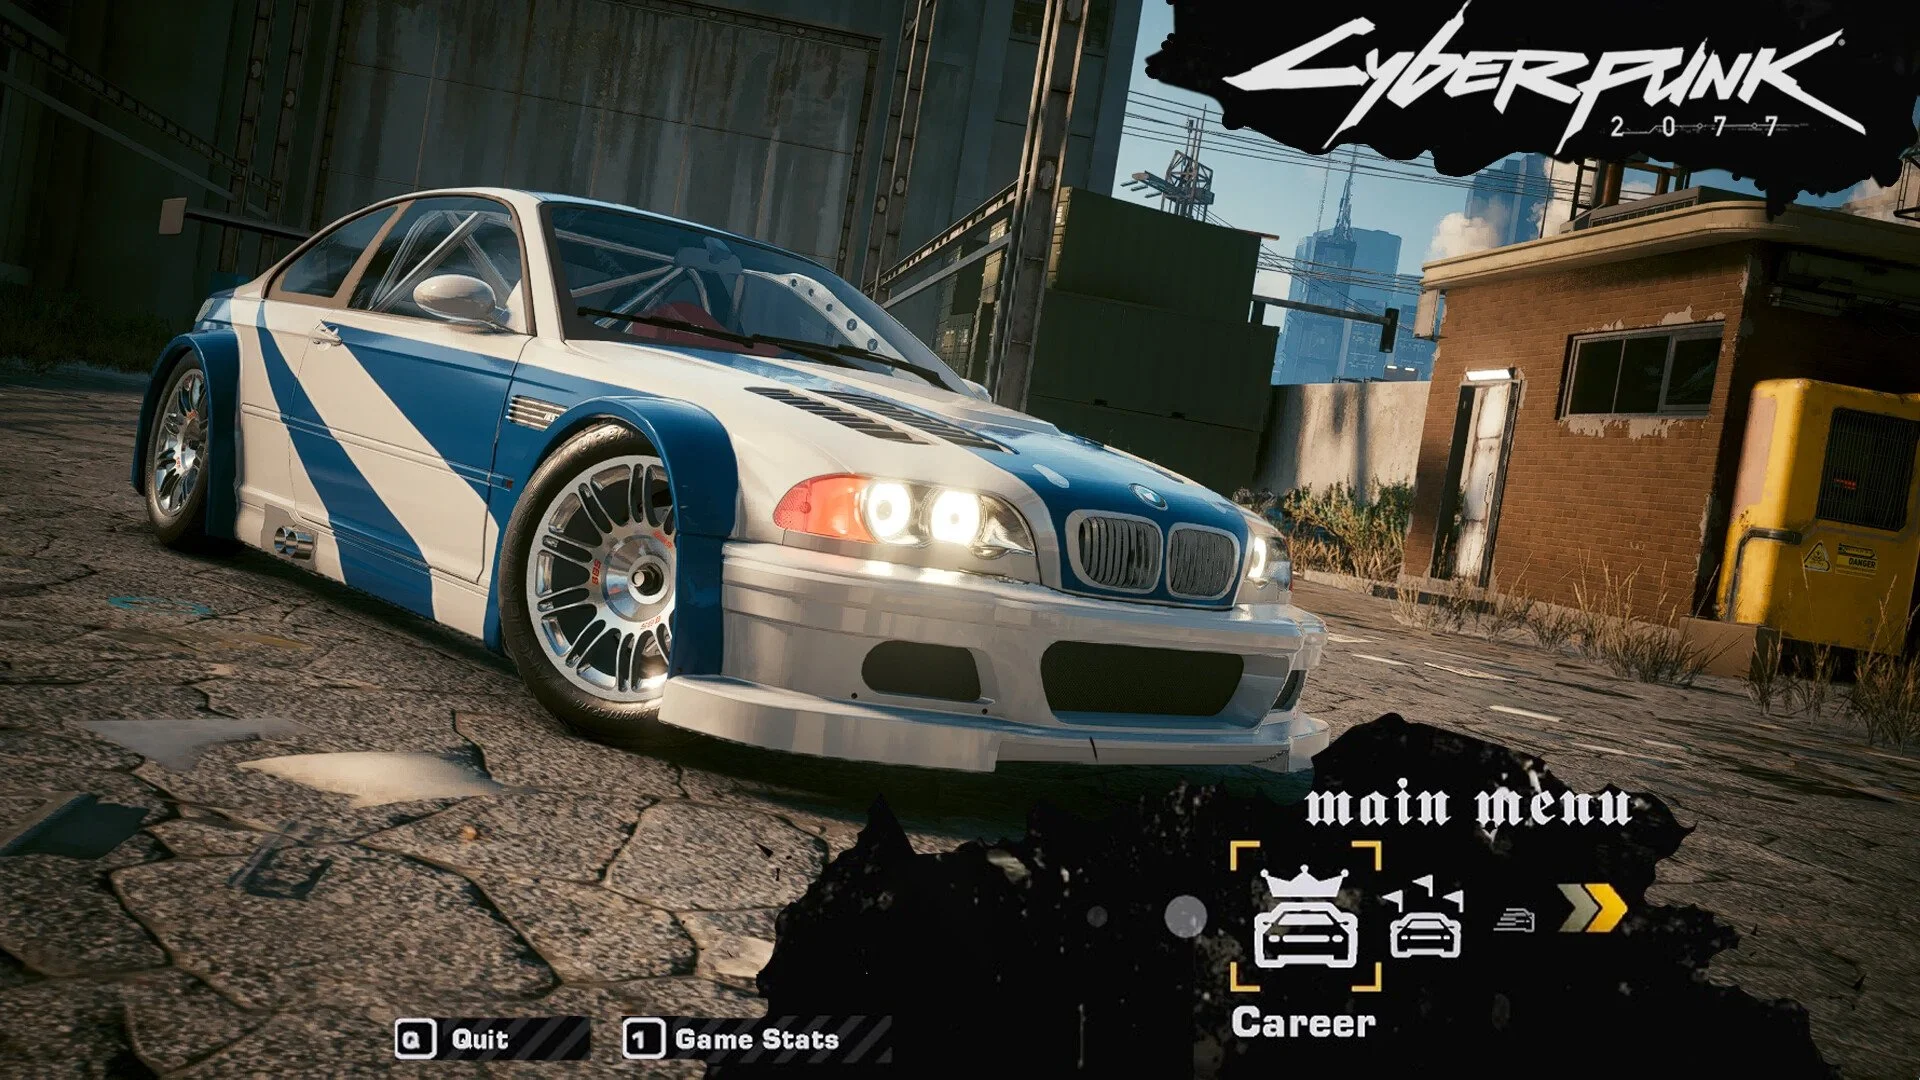 The legendary BMW from Need for Speed: Most Wanted has been added to Cyberpunk 2077